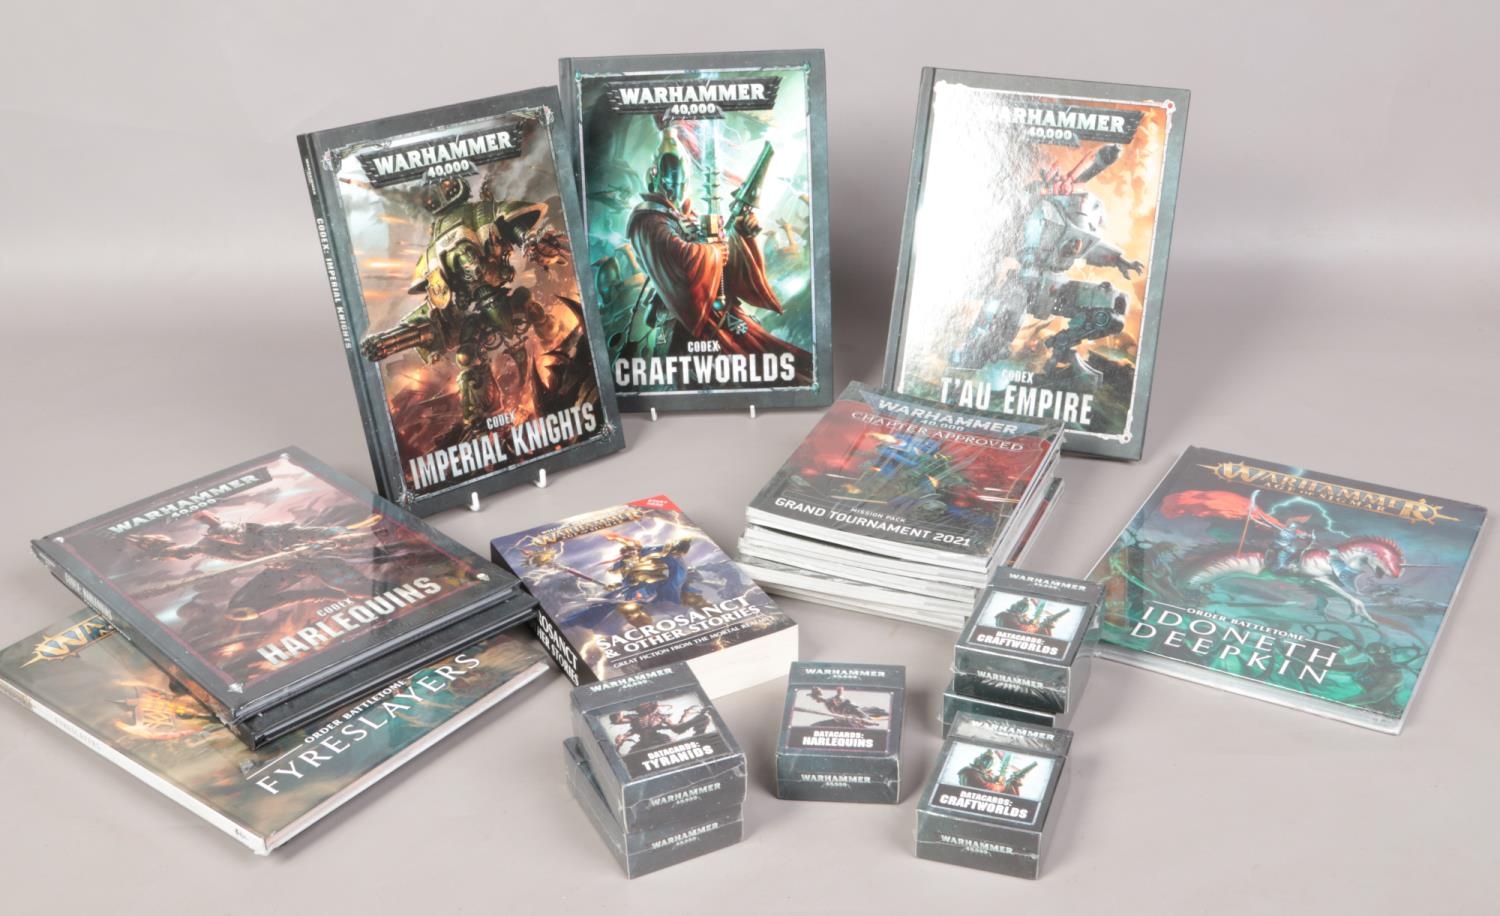 A quantity of Warhammer books & data cards. To include datacards Craftworlds, Tyranids,